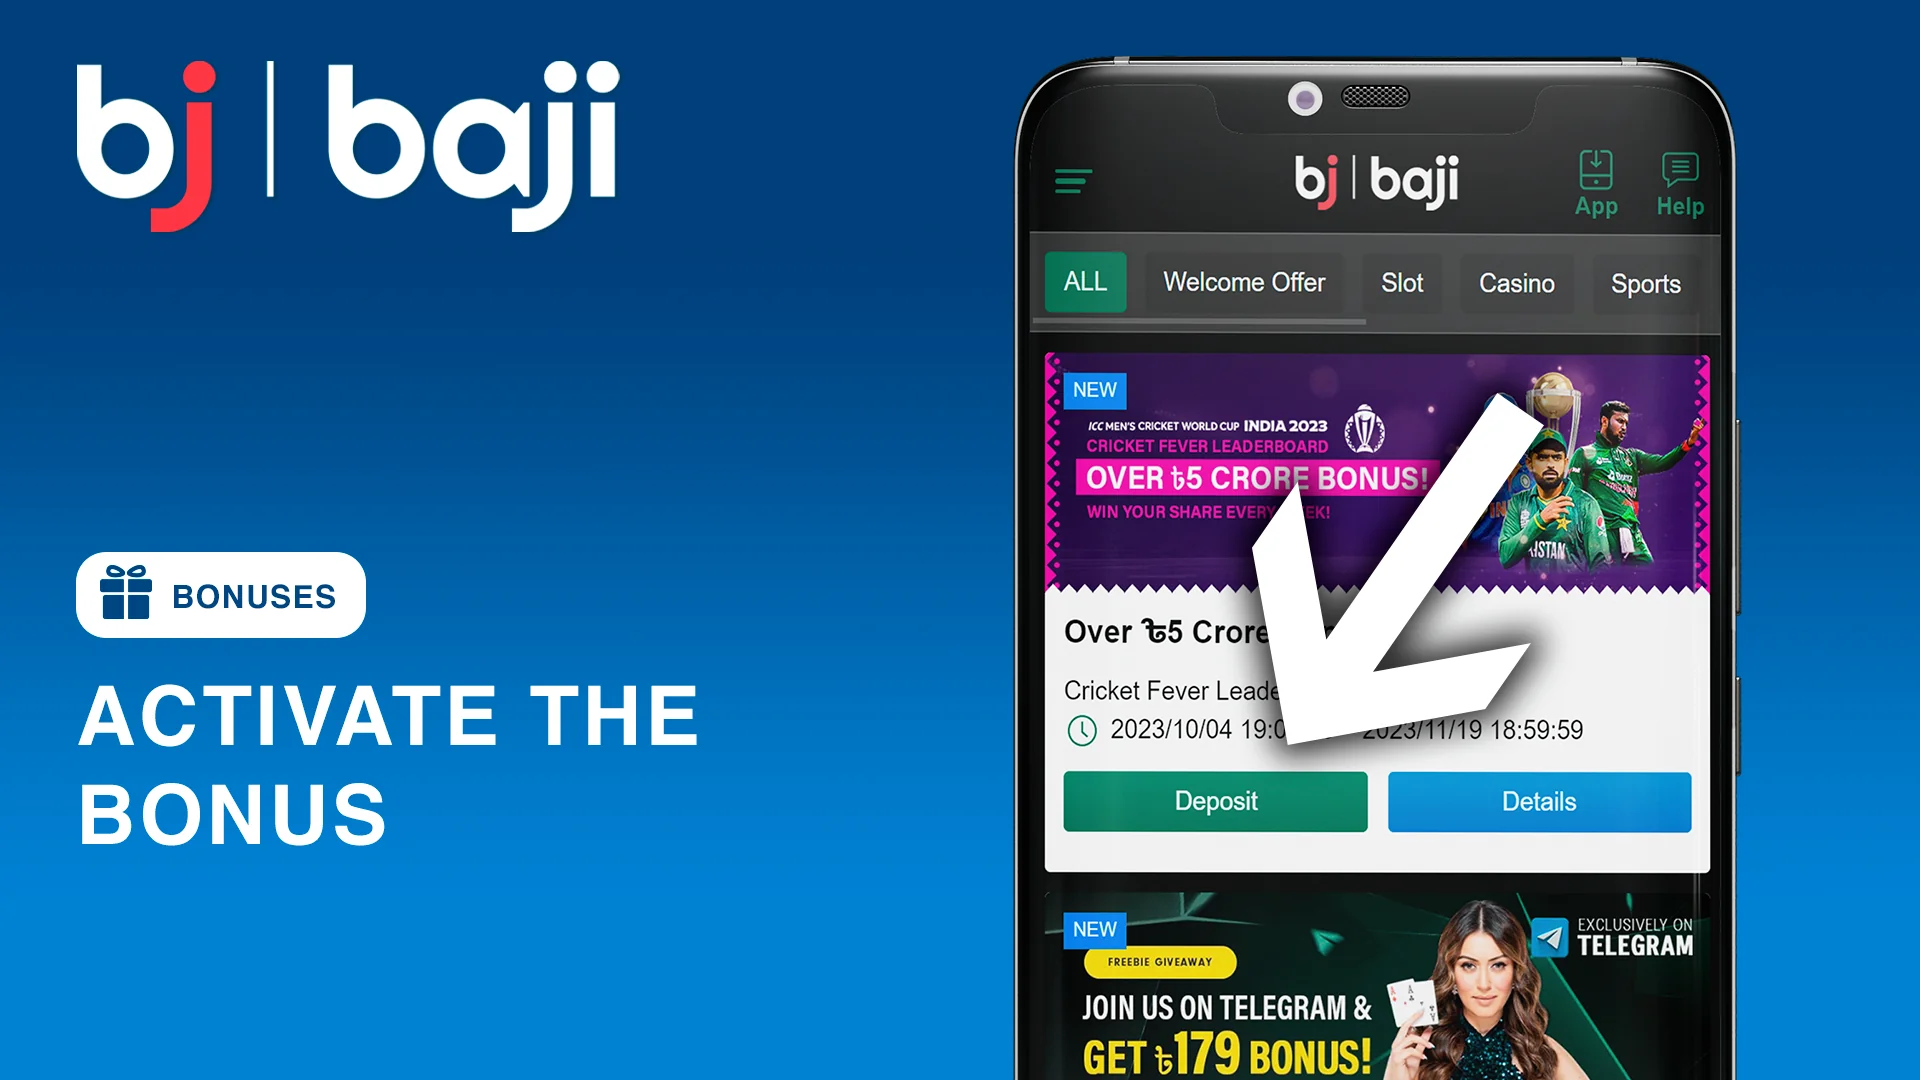 Activate Baji Bonus by Clicking green 'Activate' button